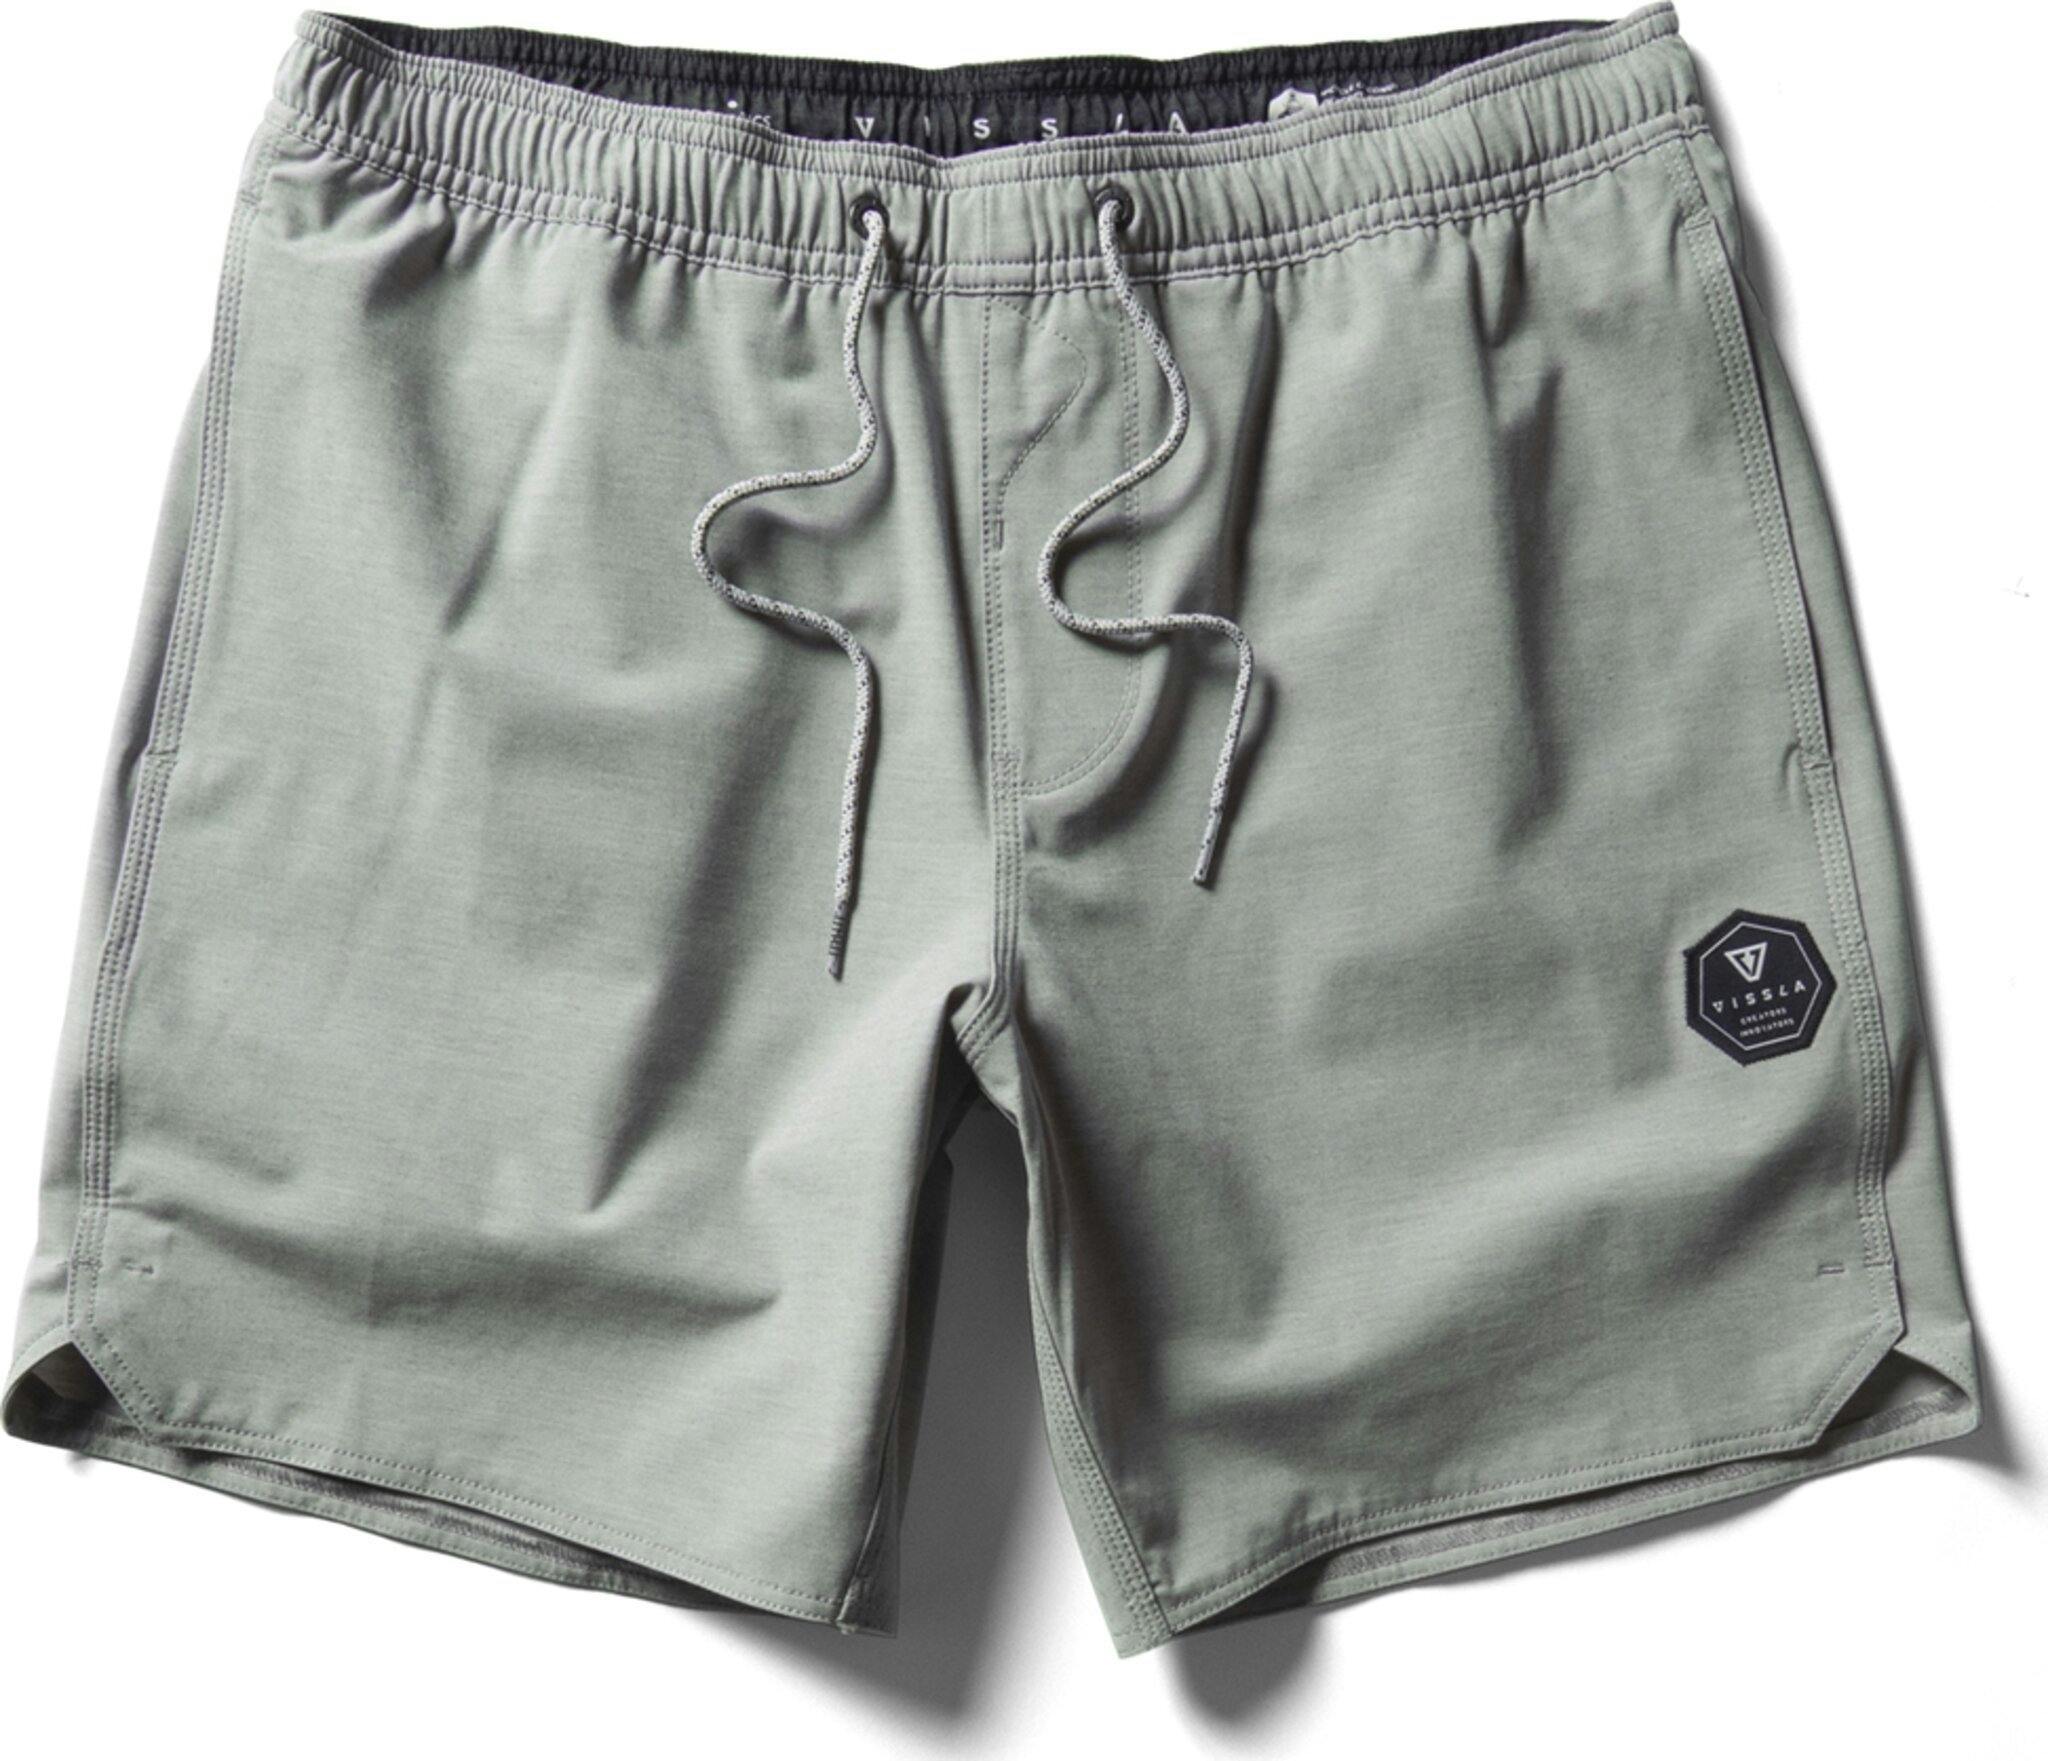 Product image for Breakers Ecolastic 16.5 In Boardshorts - Men's